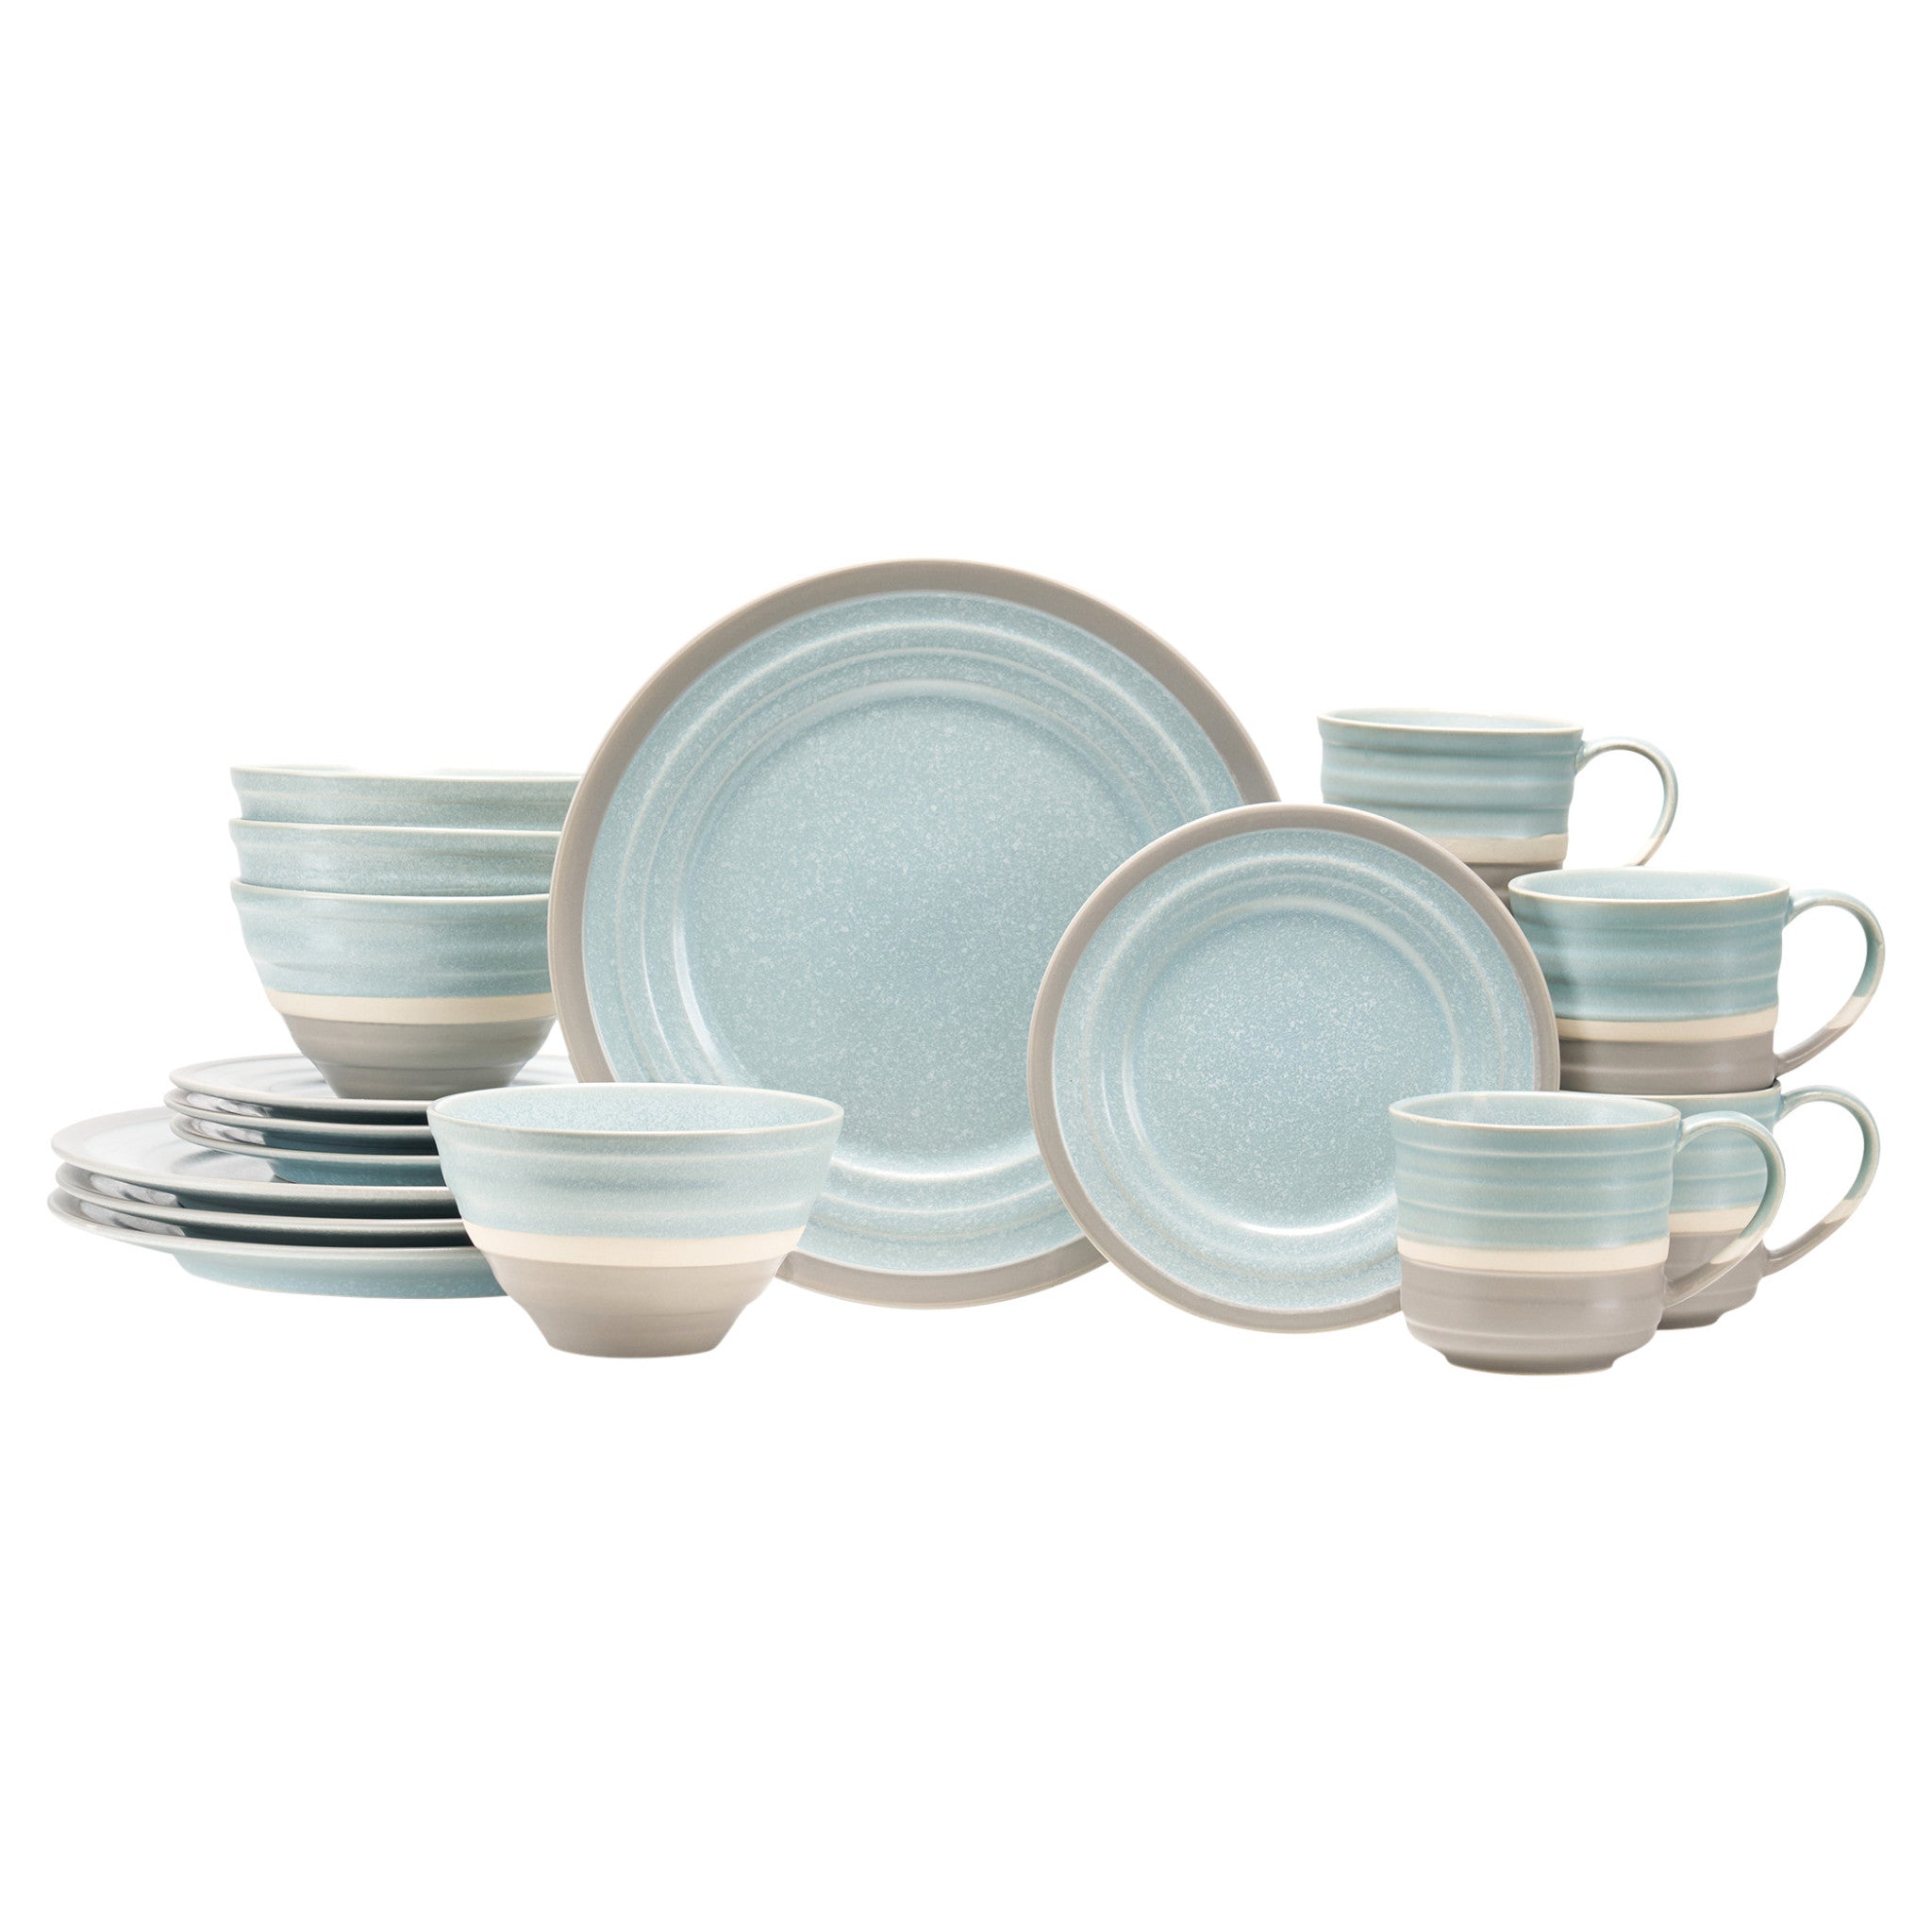 Blue and Gray Sixteen Piece Round Tone on Tone Ceramic Service For Four Dinnerware Set